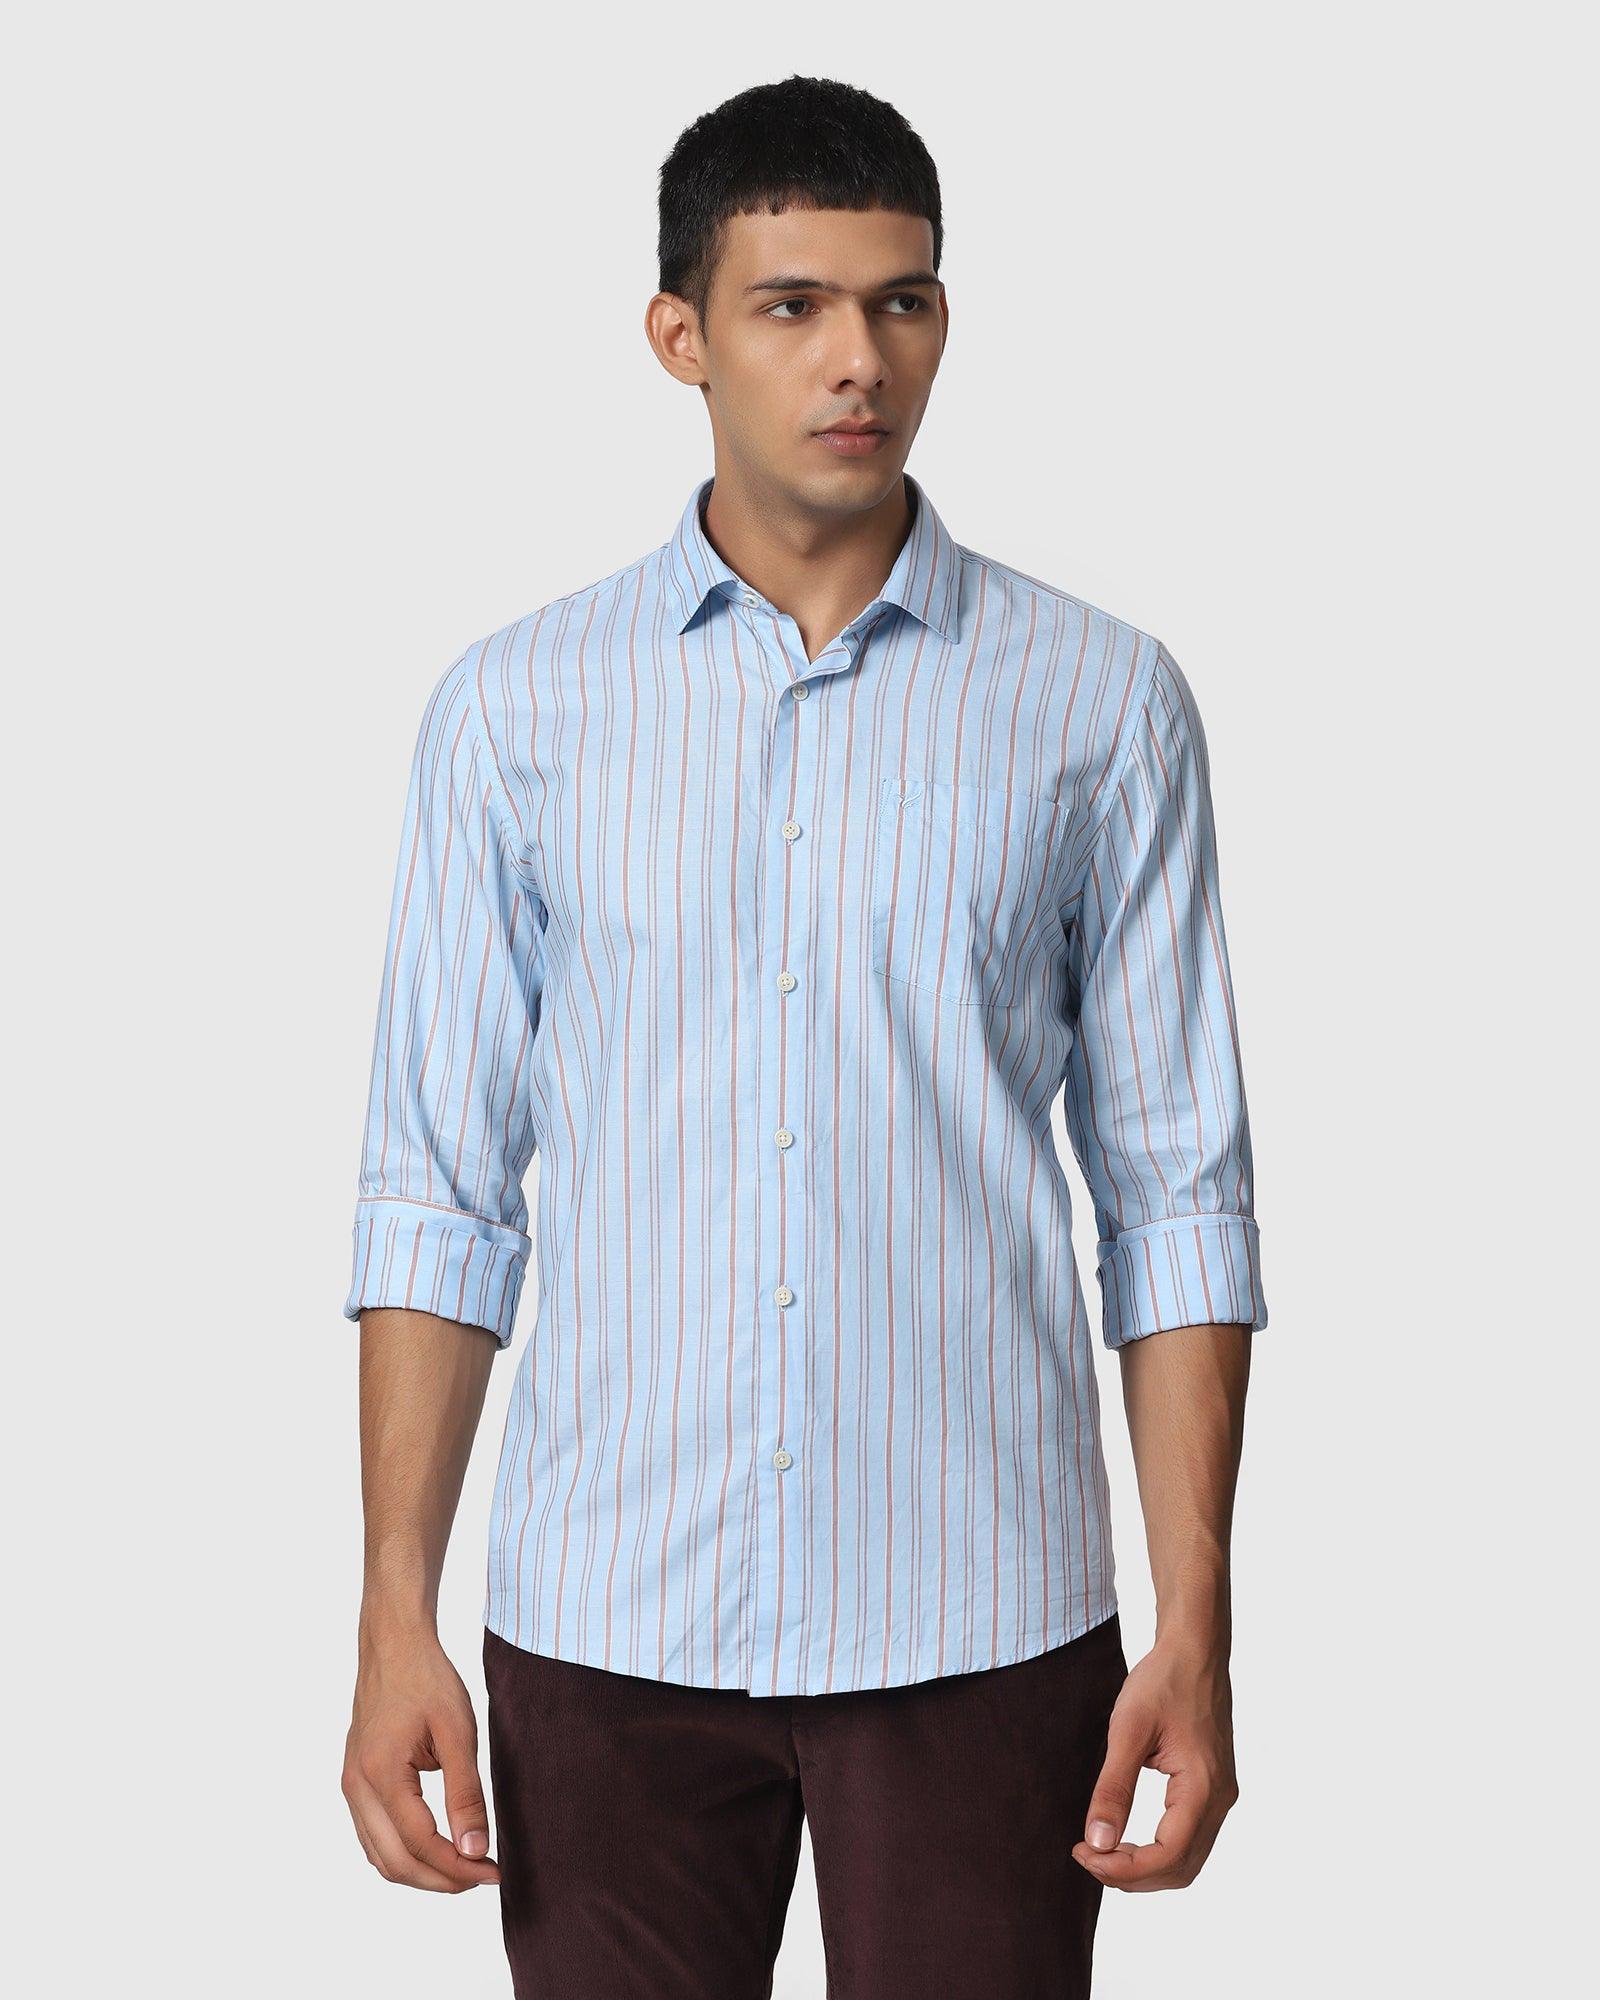 Casual Blue Striped Shirt - Indiana